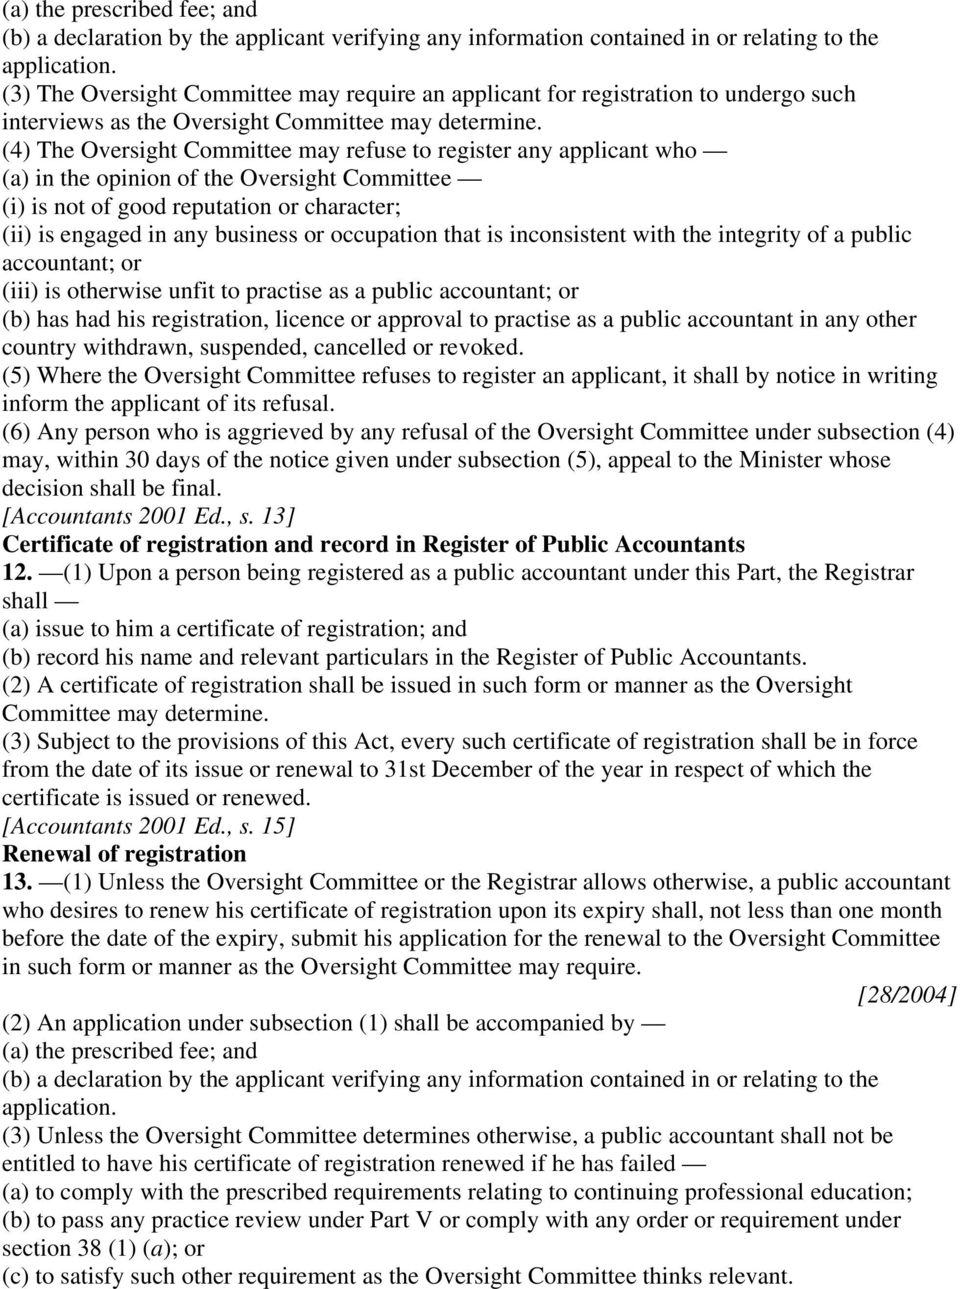 (4) The Oversight Committee may refuse to register any applicant who (a) in the opinion of the Oversight Committee (i) is not of good reputation or character; (ii) is engaged in any business or